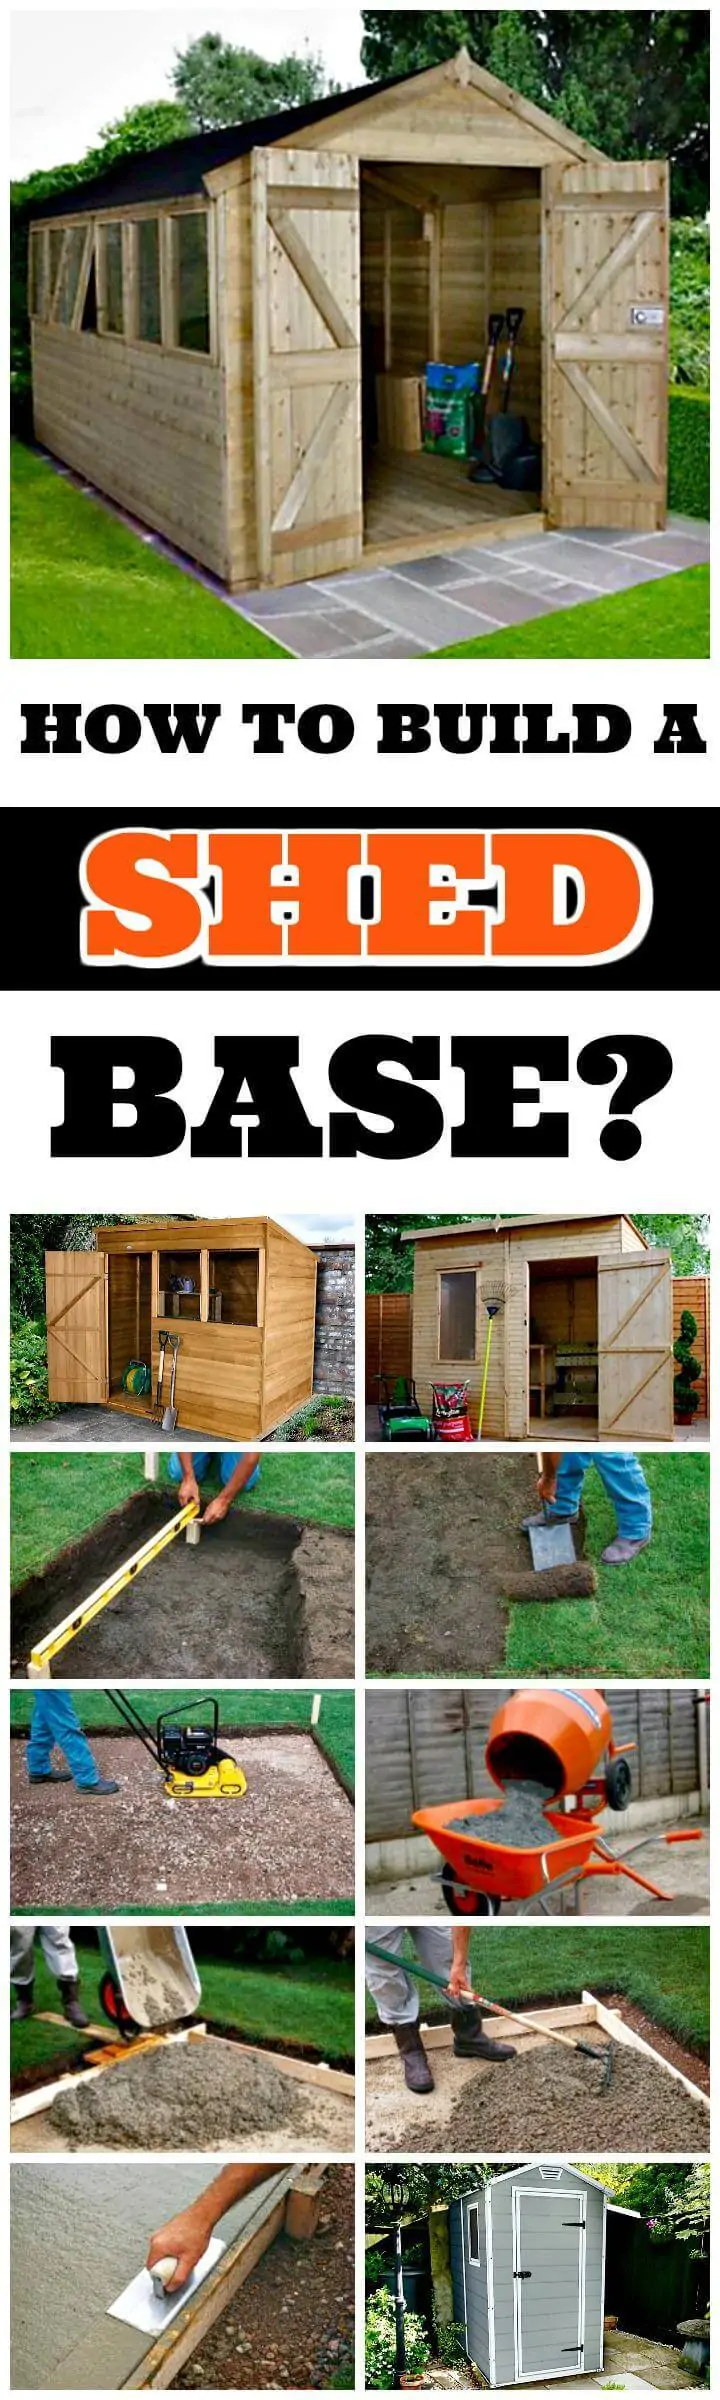 HOW-TO-BUILD-A-SHED-BASE